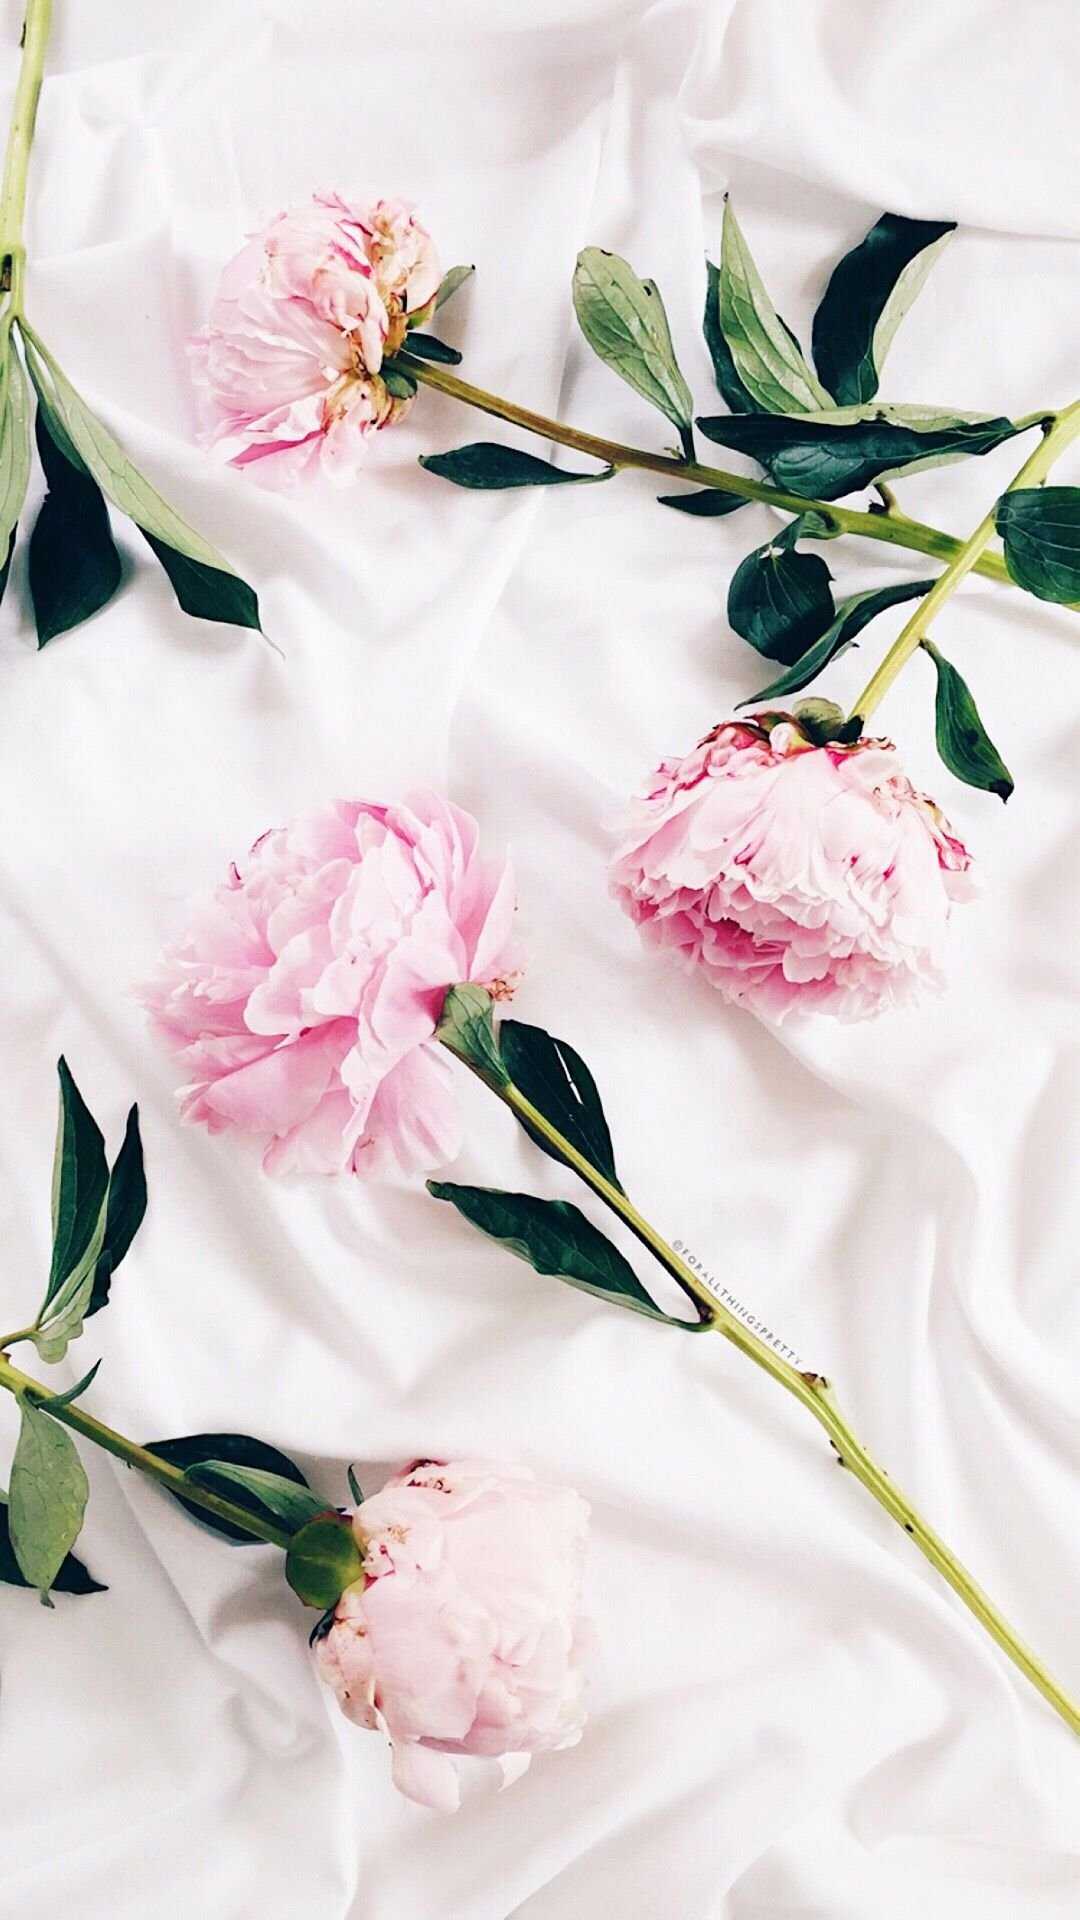 A close up of some flowers on white cloth - White